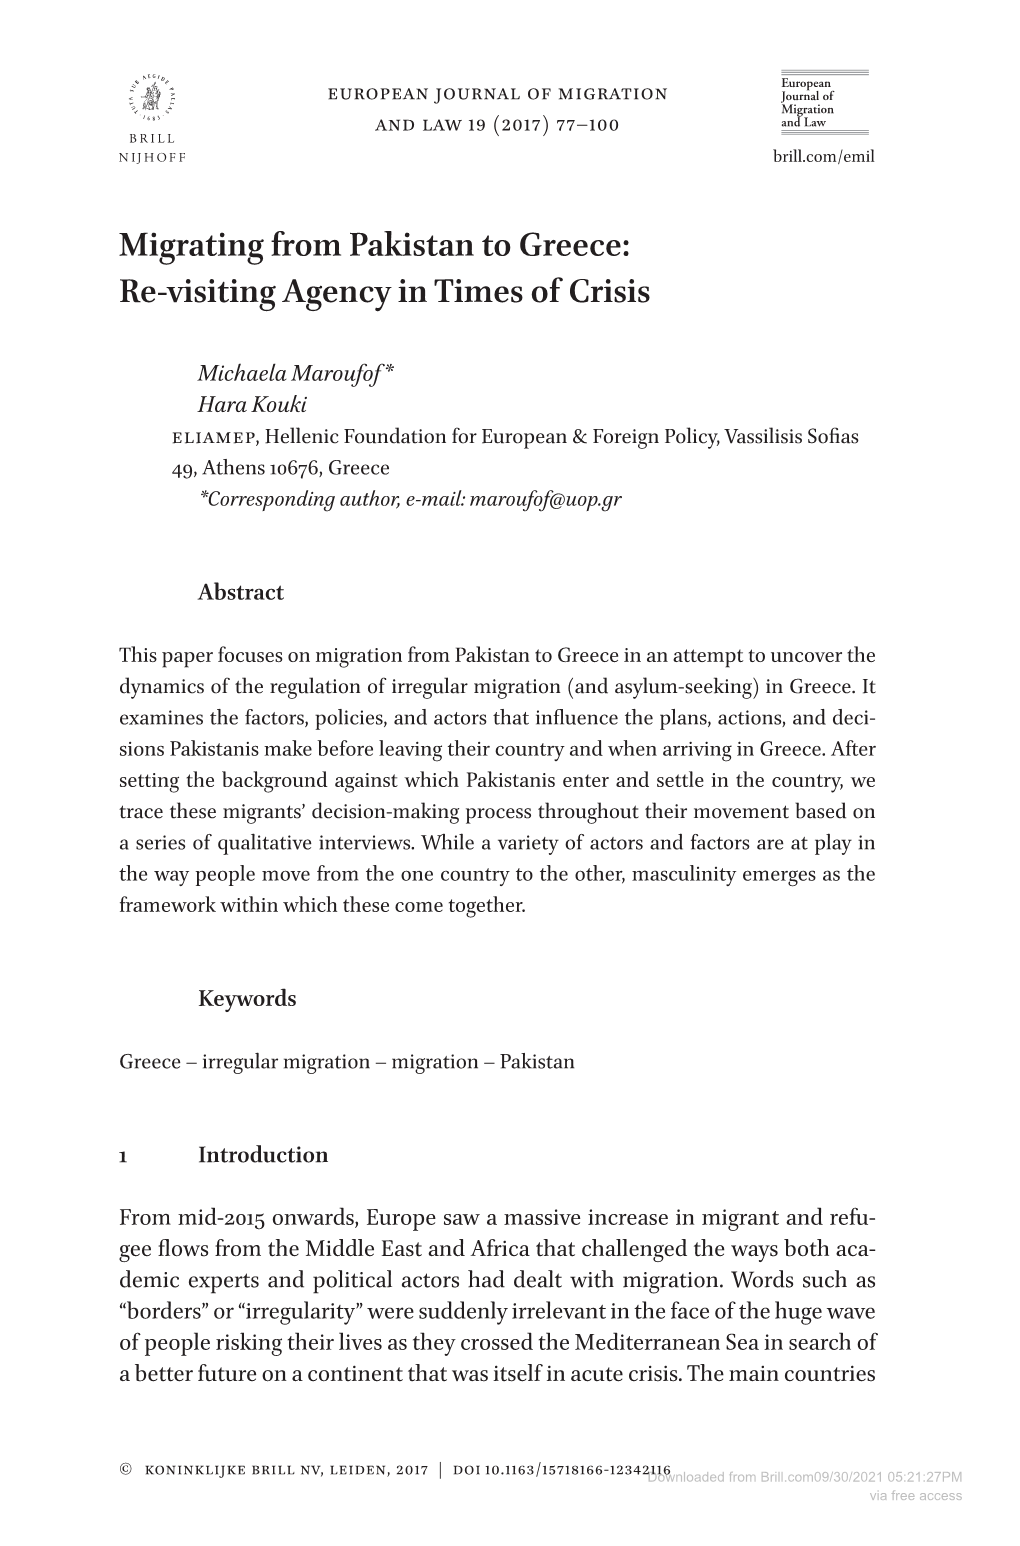 Migrating from Pakistan to Greece: Re-Visiting Agency in Times of Crisis